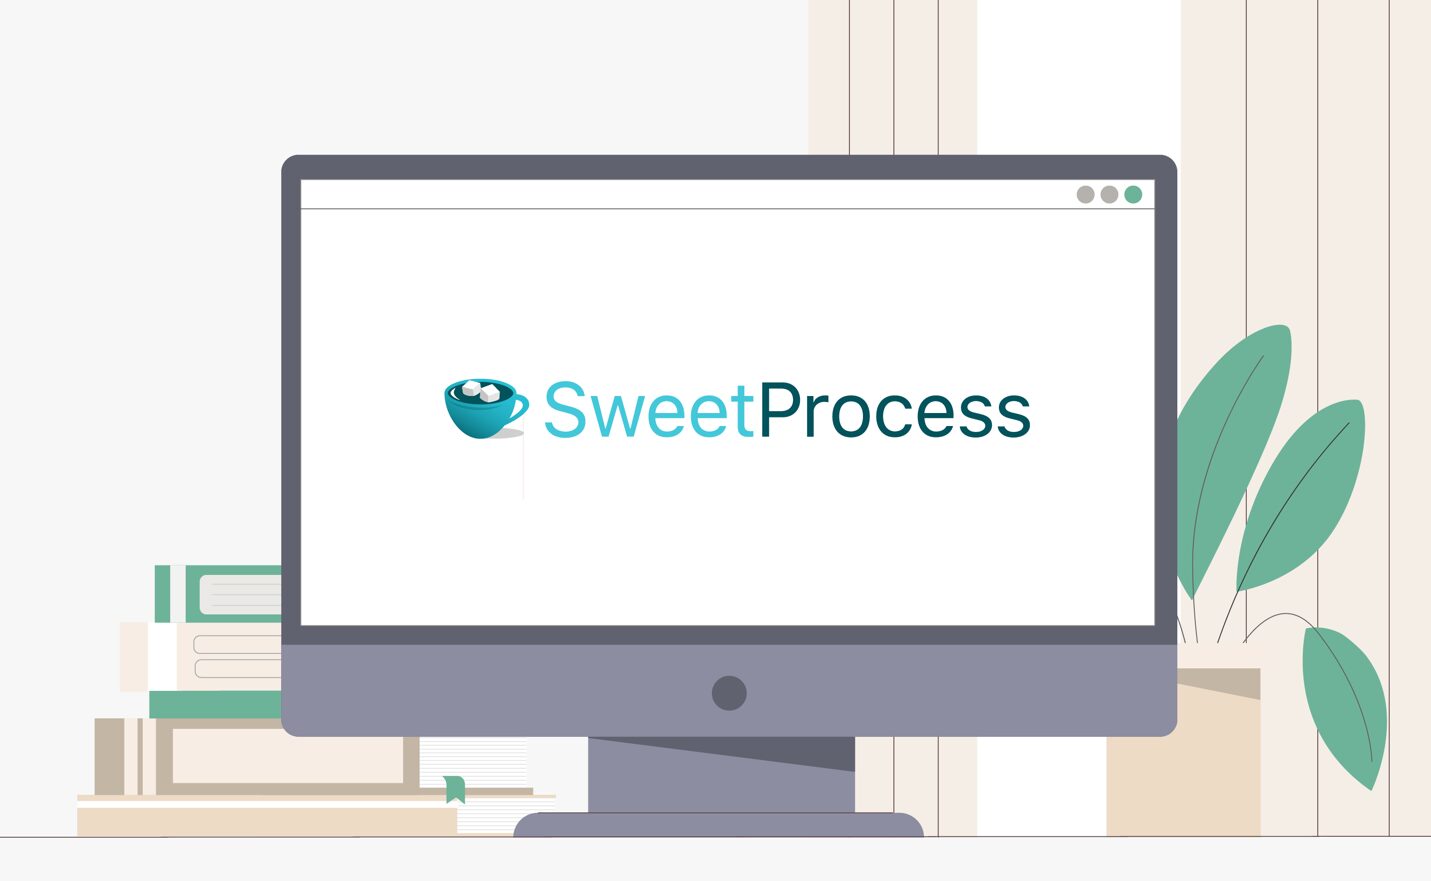 Onboard Your New Hires Quickly and Easily With SweetProcess